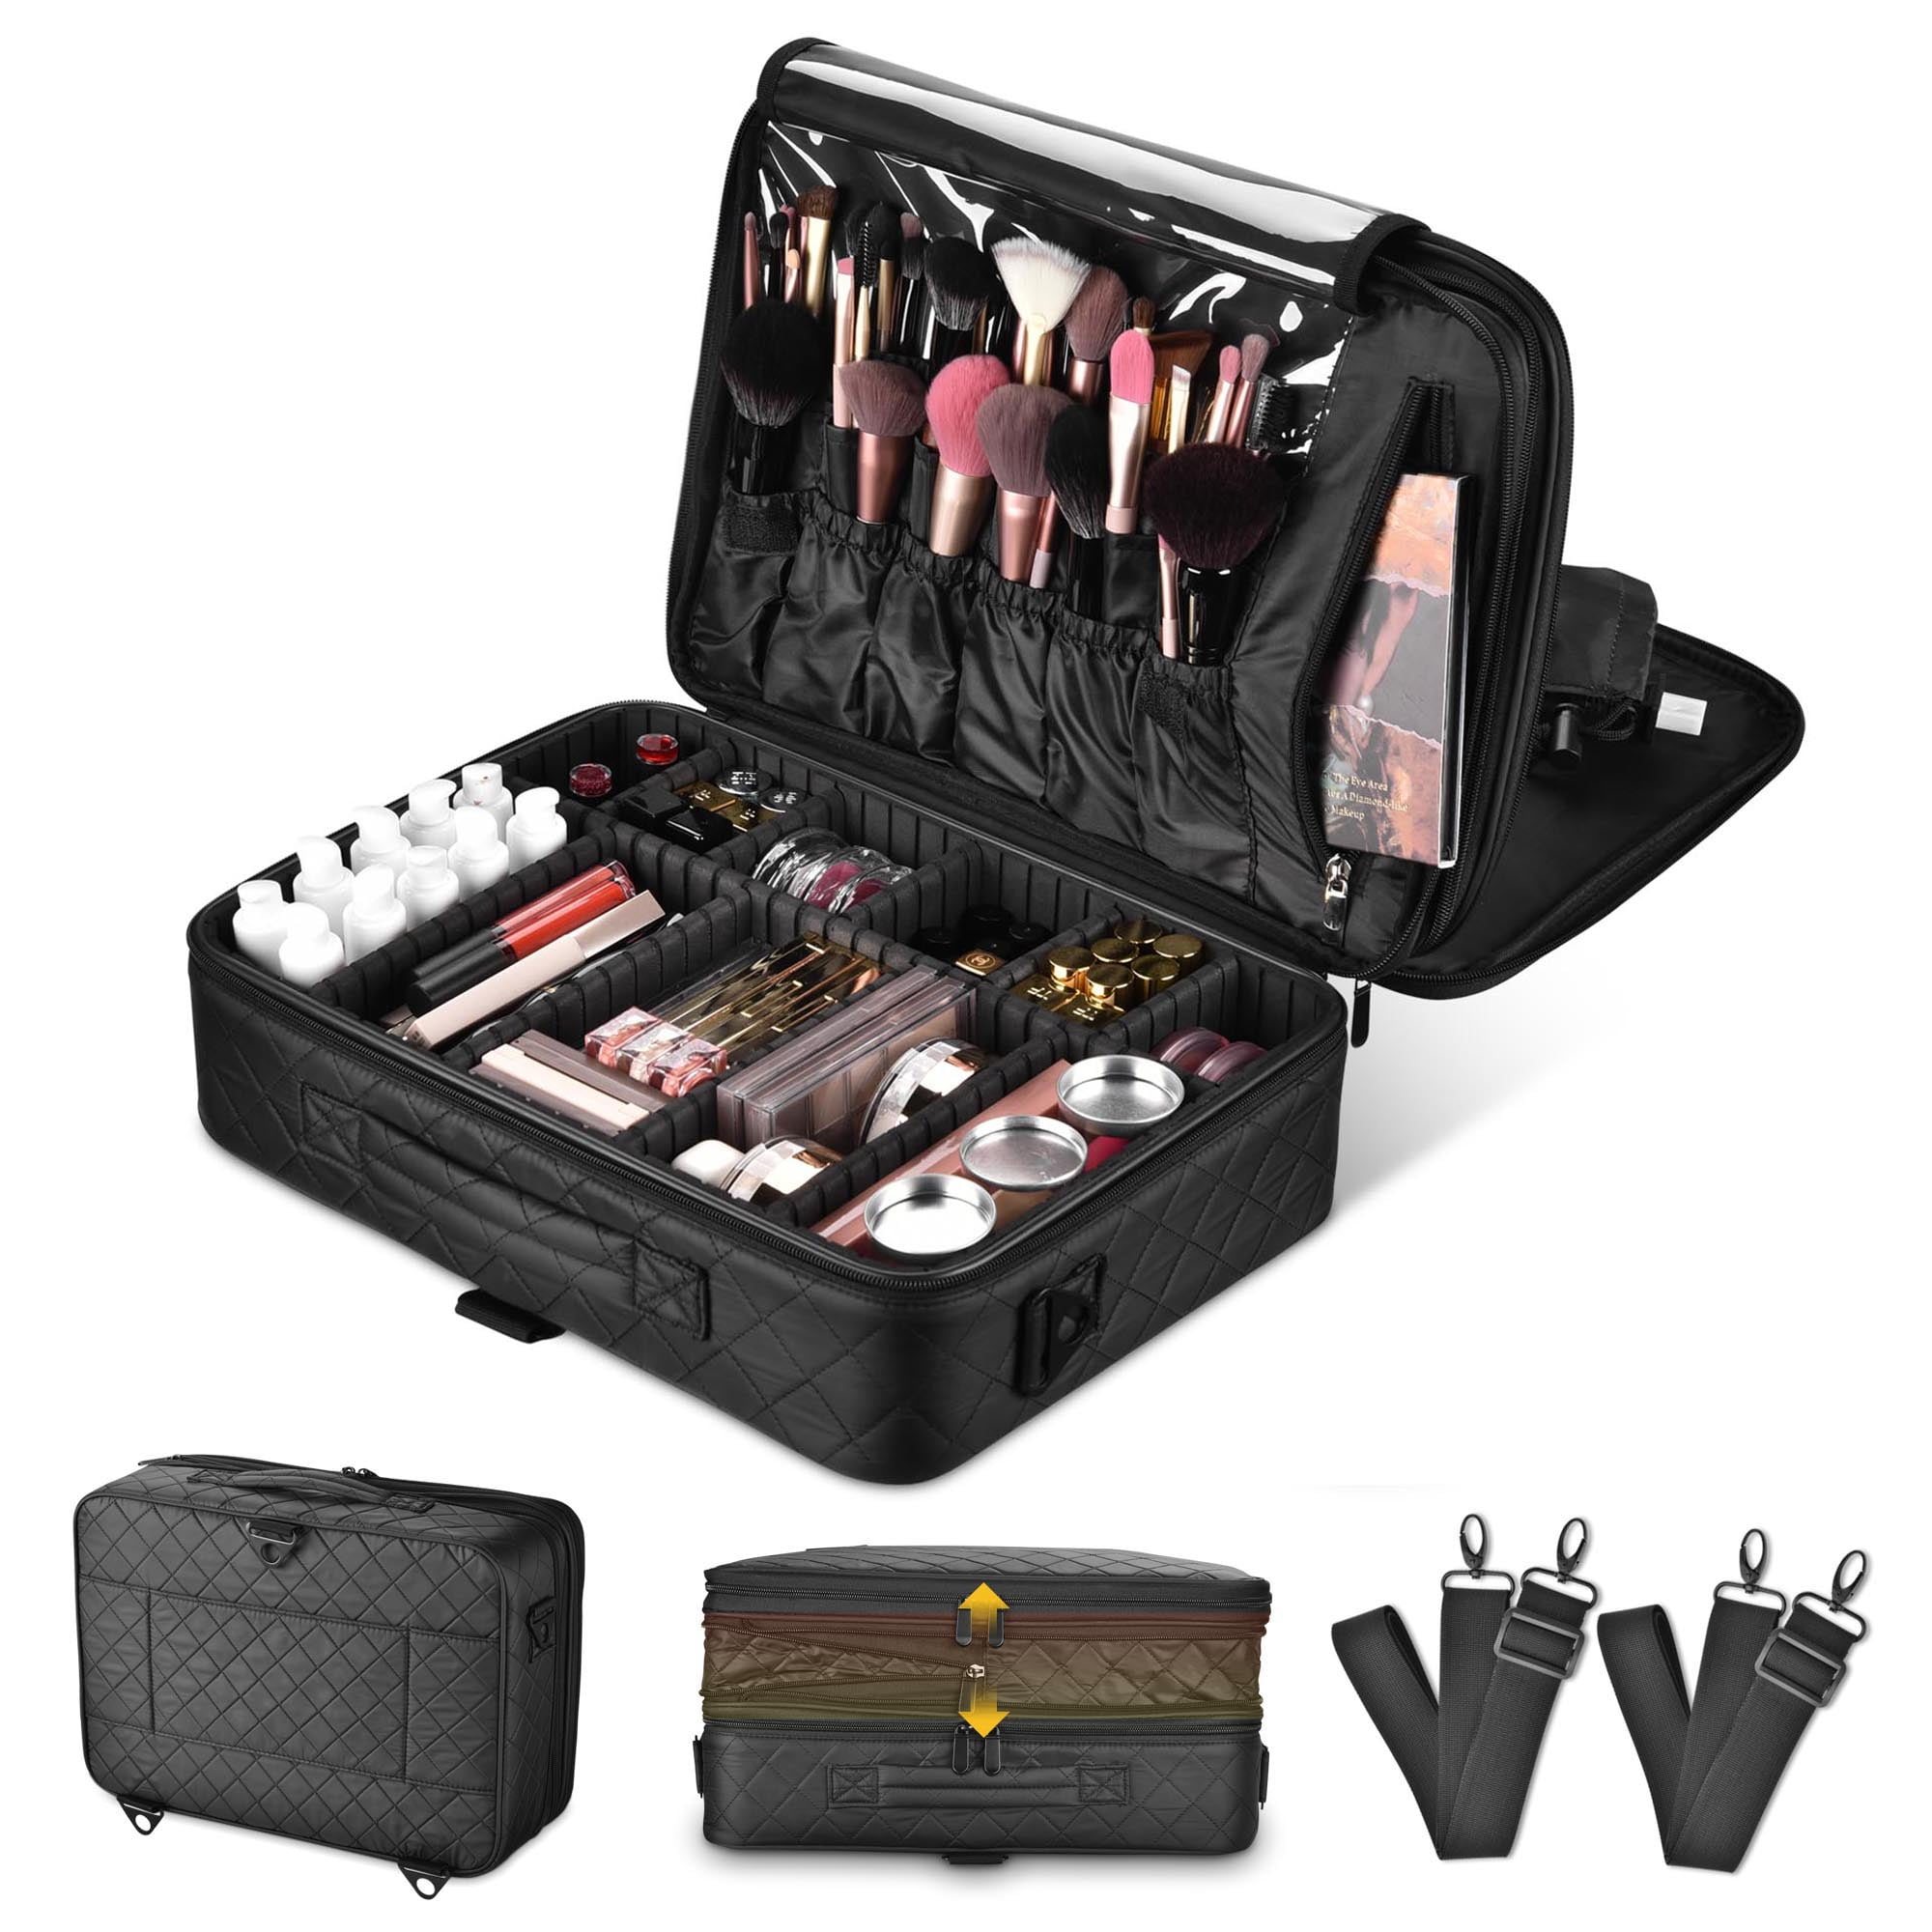 Byootique Portable Makeup Train Case Cosmetic Organizer Brush Holder ...